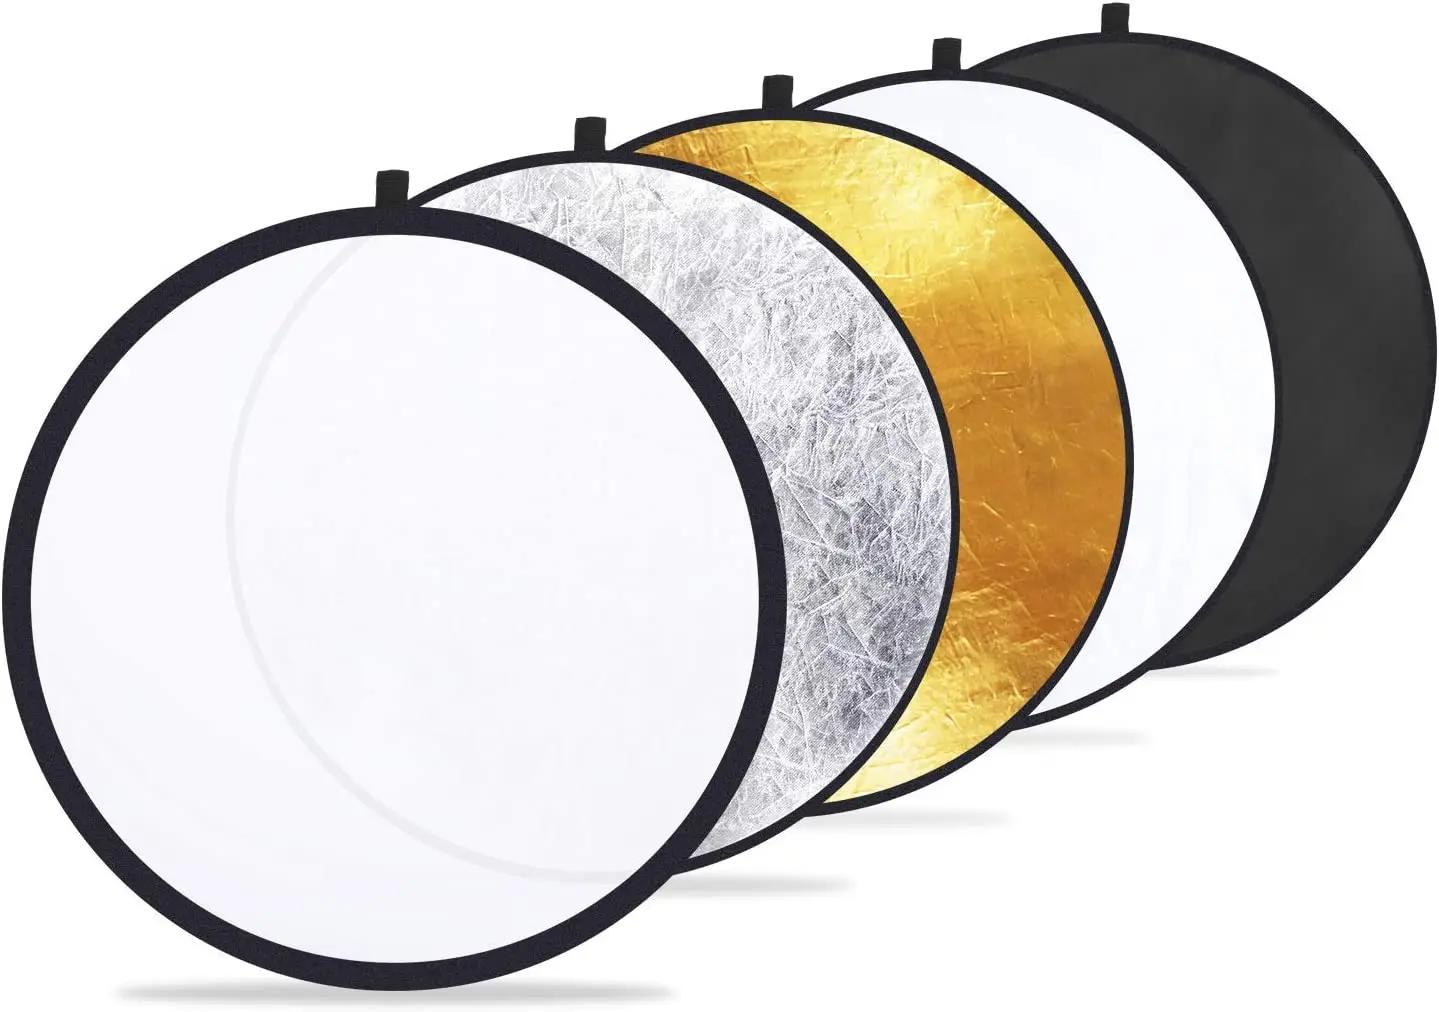 

24" (60cm) 5 in 1 Photo Reflectors for Foldable Multidisc Photo Reflector Photography with Bag - Translucent Silver Golden Wh